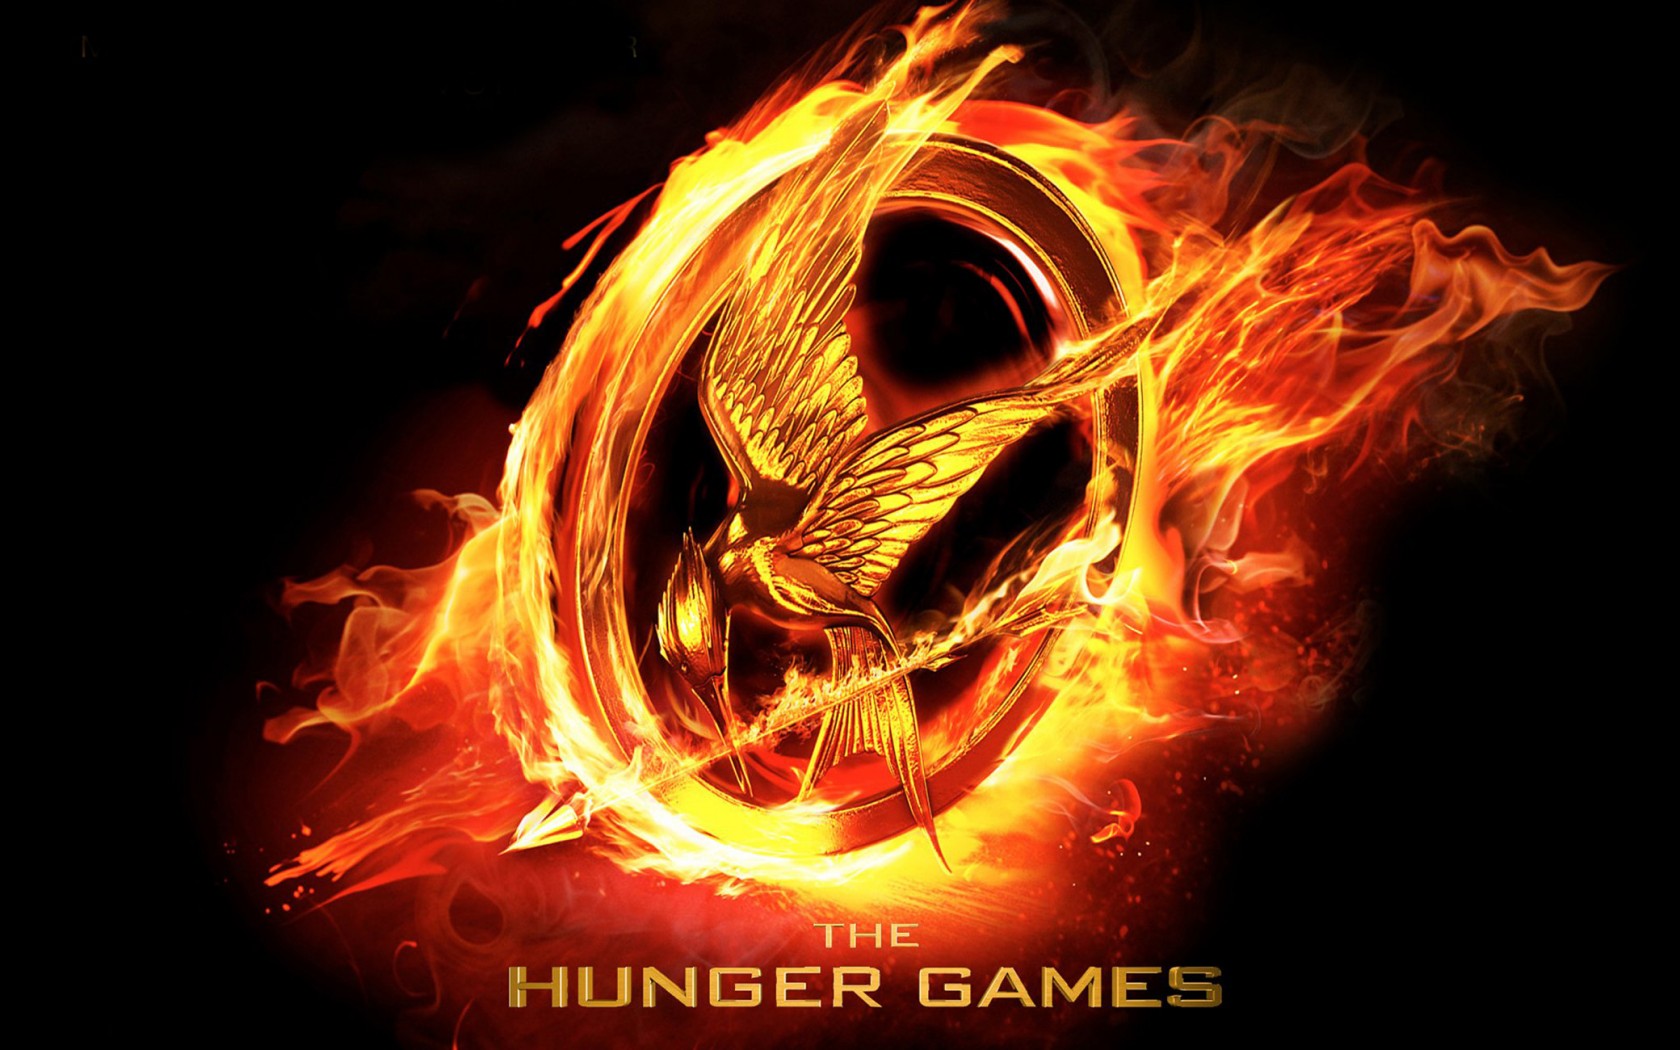 The Hunger Games Catching Fire Wallpaper High Definition